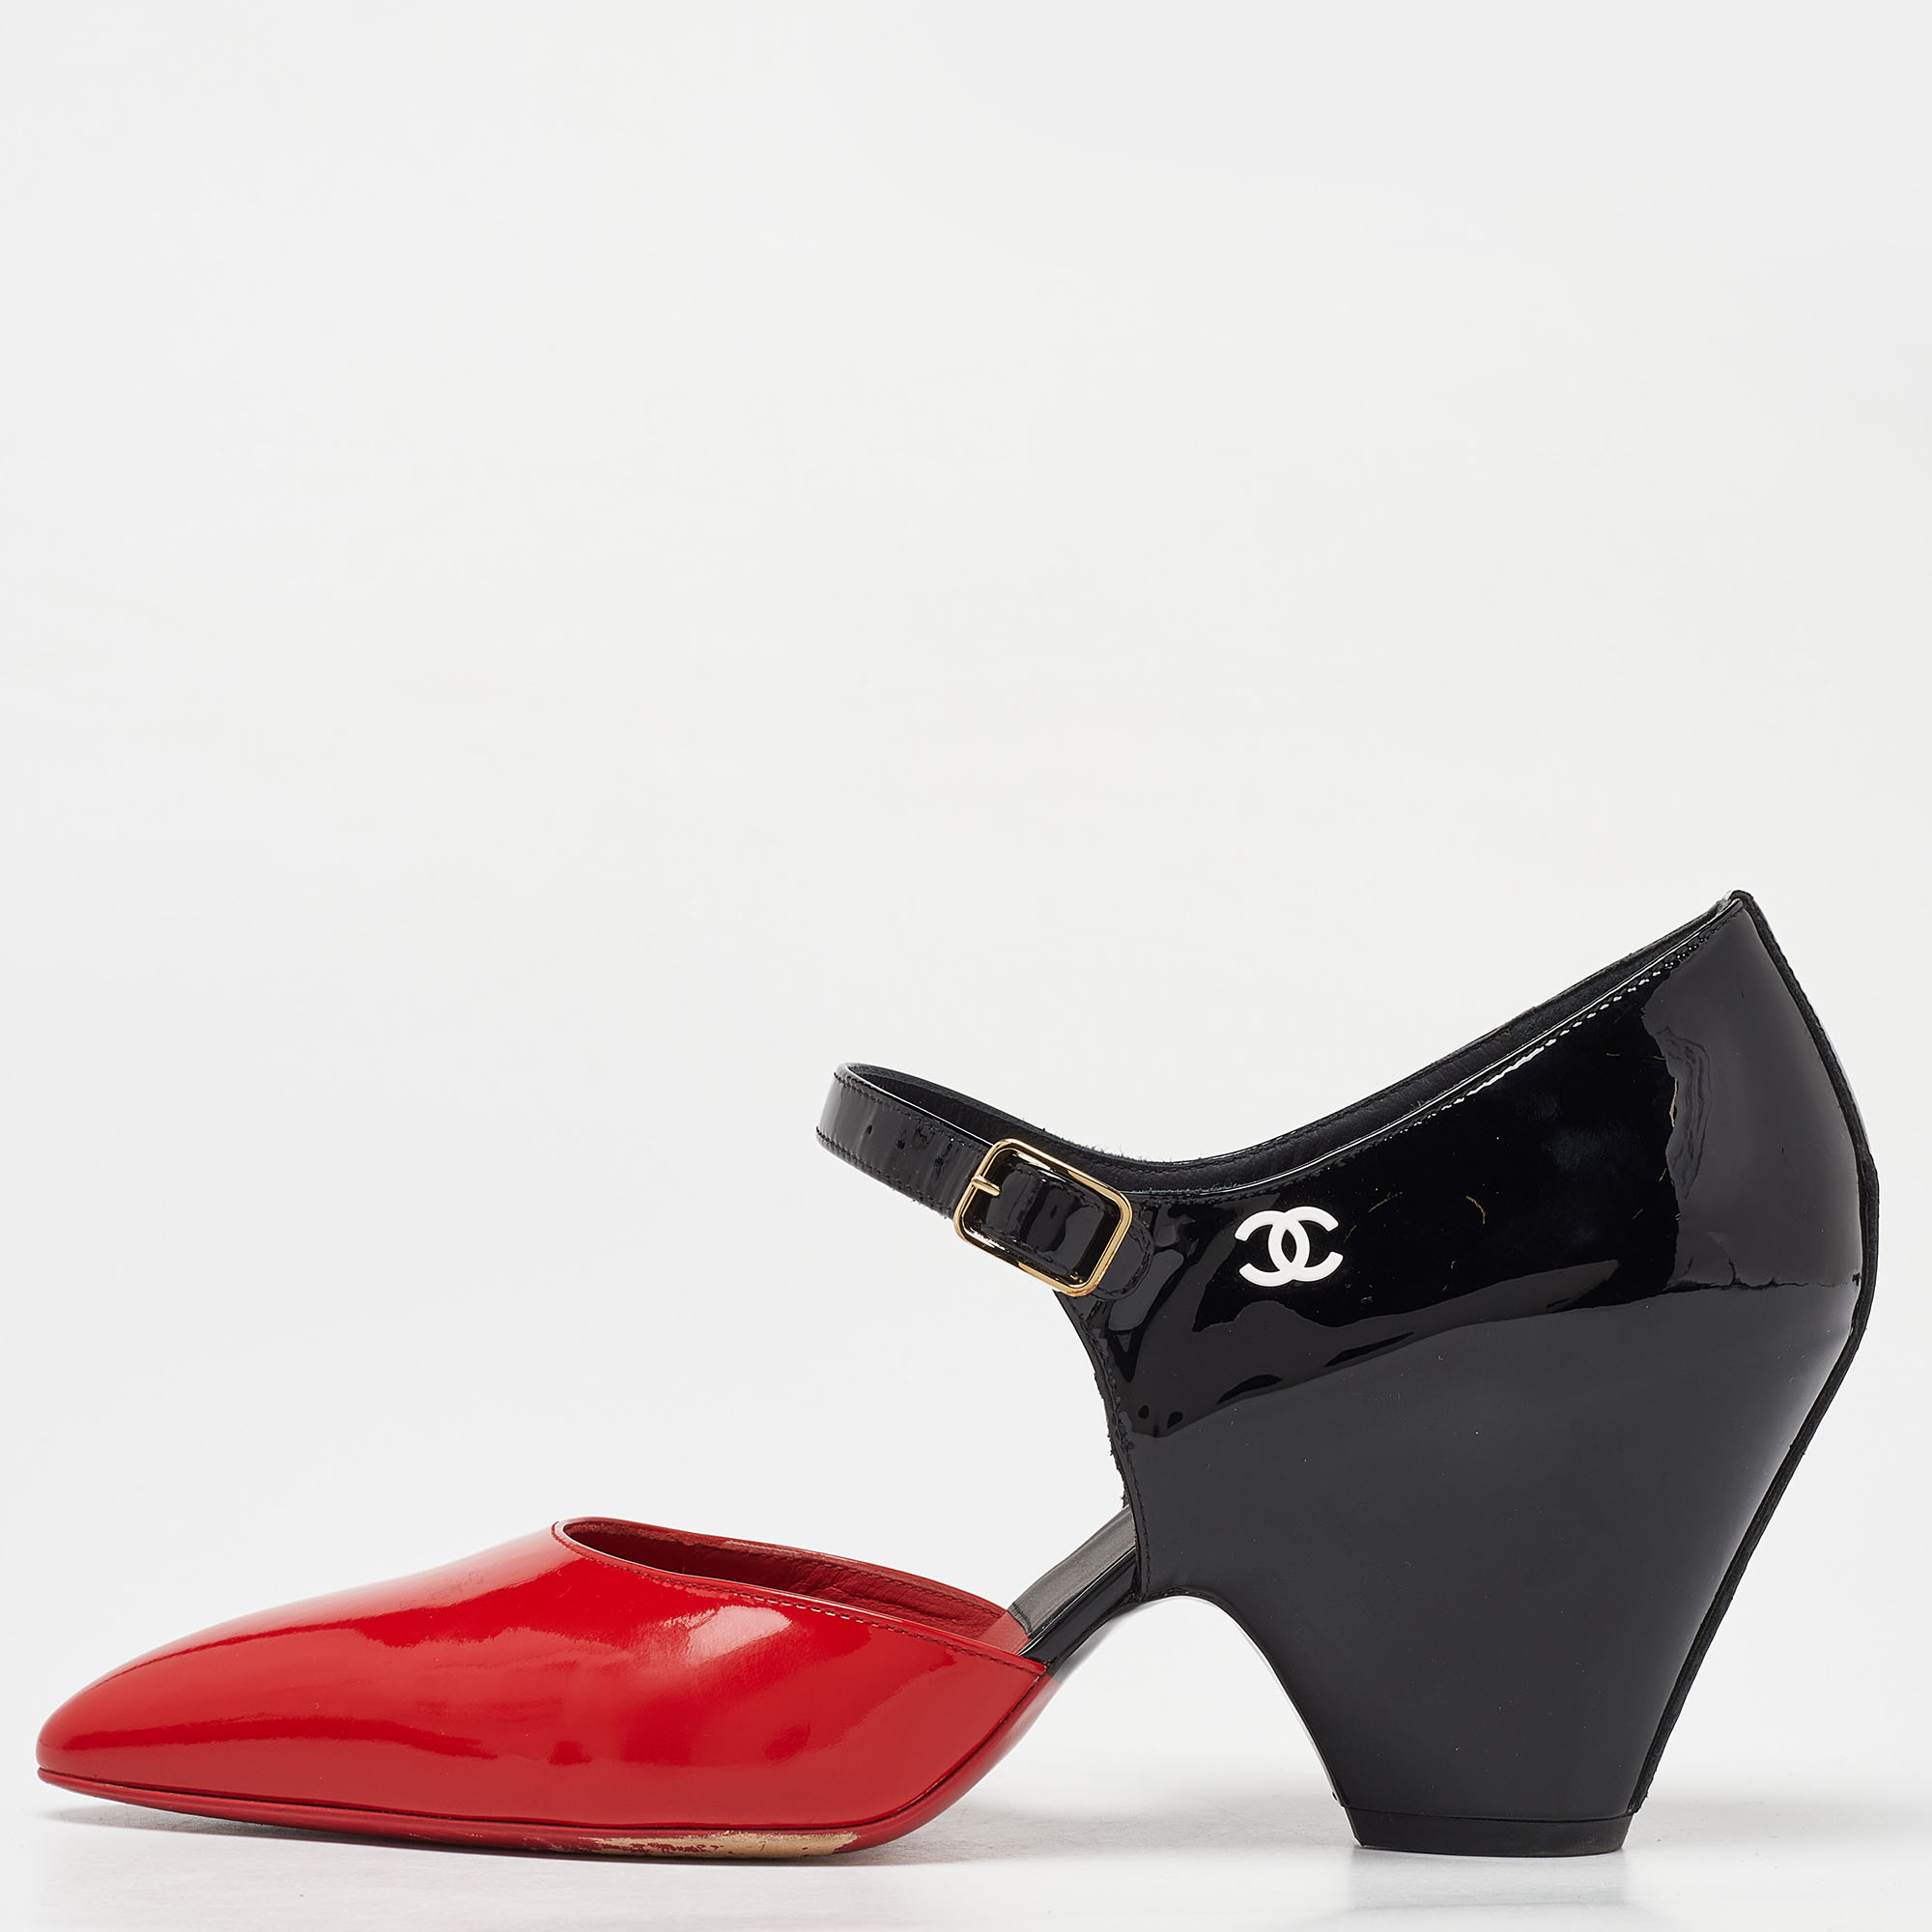 Chanel red/black patent leather mary jane wedge pumps size 40